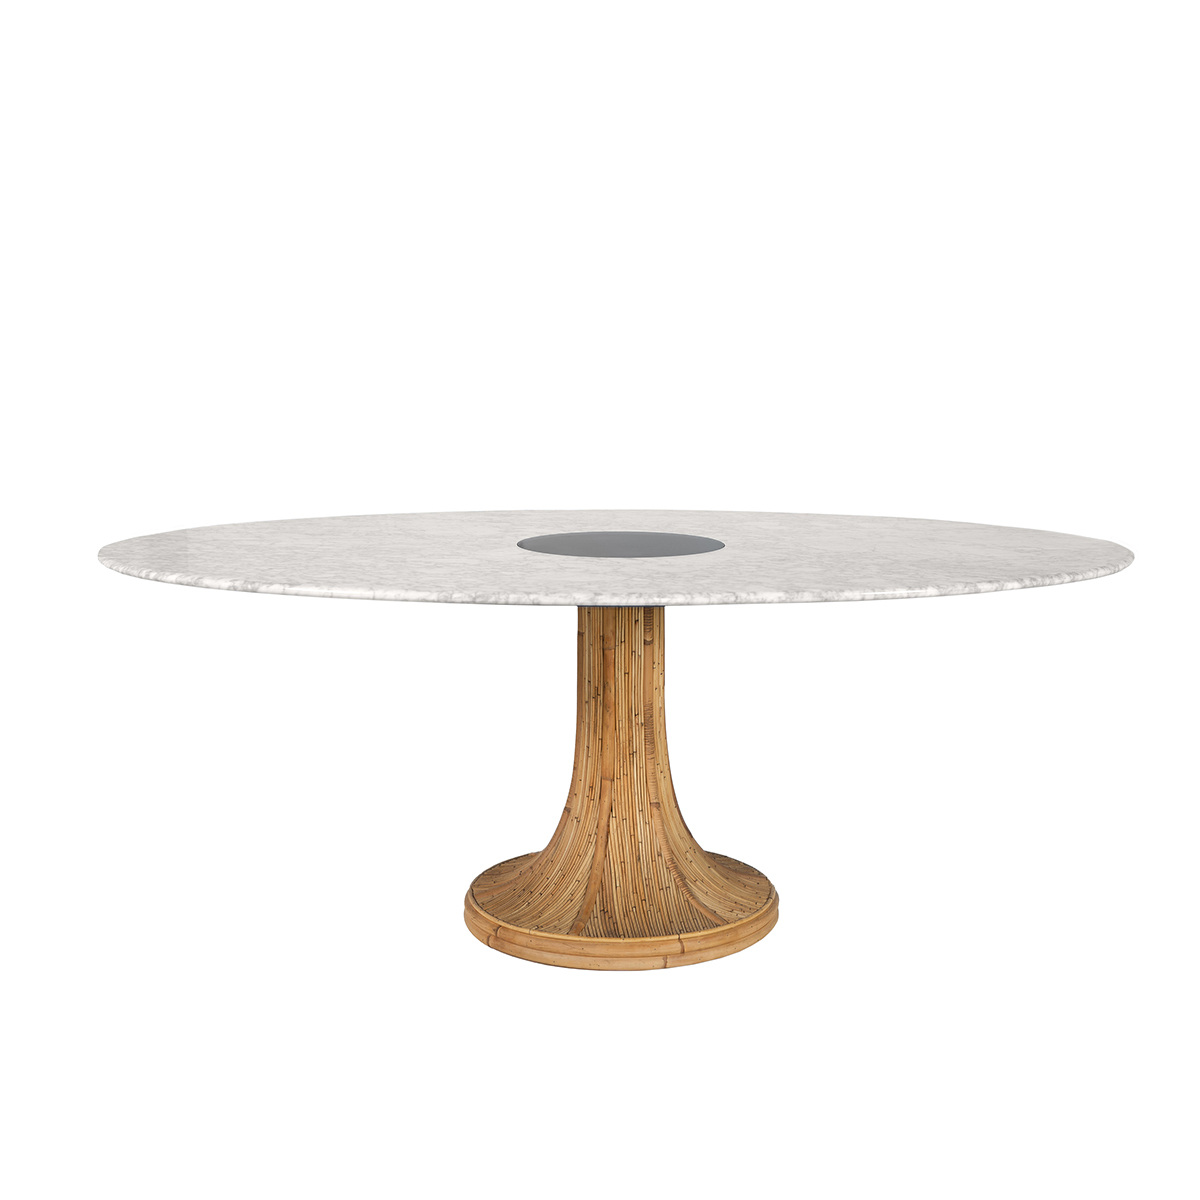 Oval Dining Table Riviera, White / Natural - ⌀199 x H74 cm - Carrara marble / Rattan - image 1